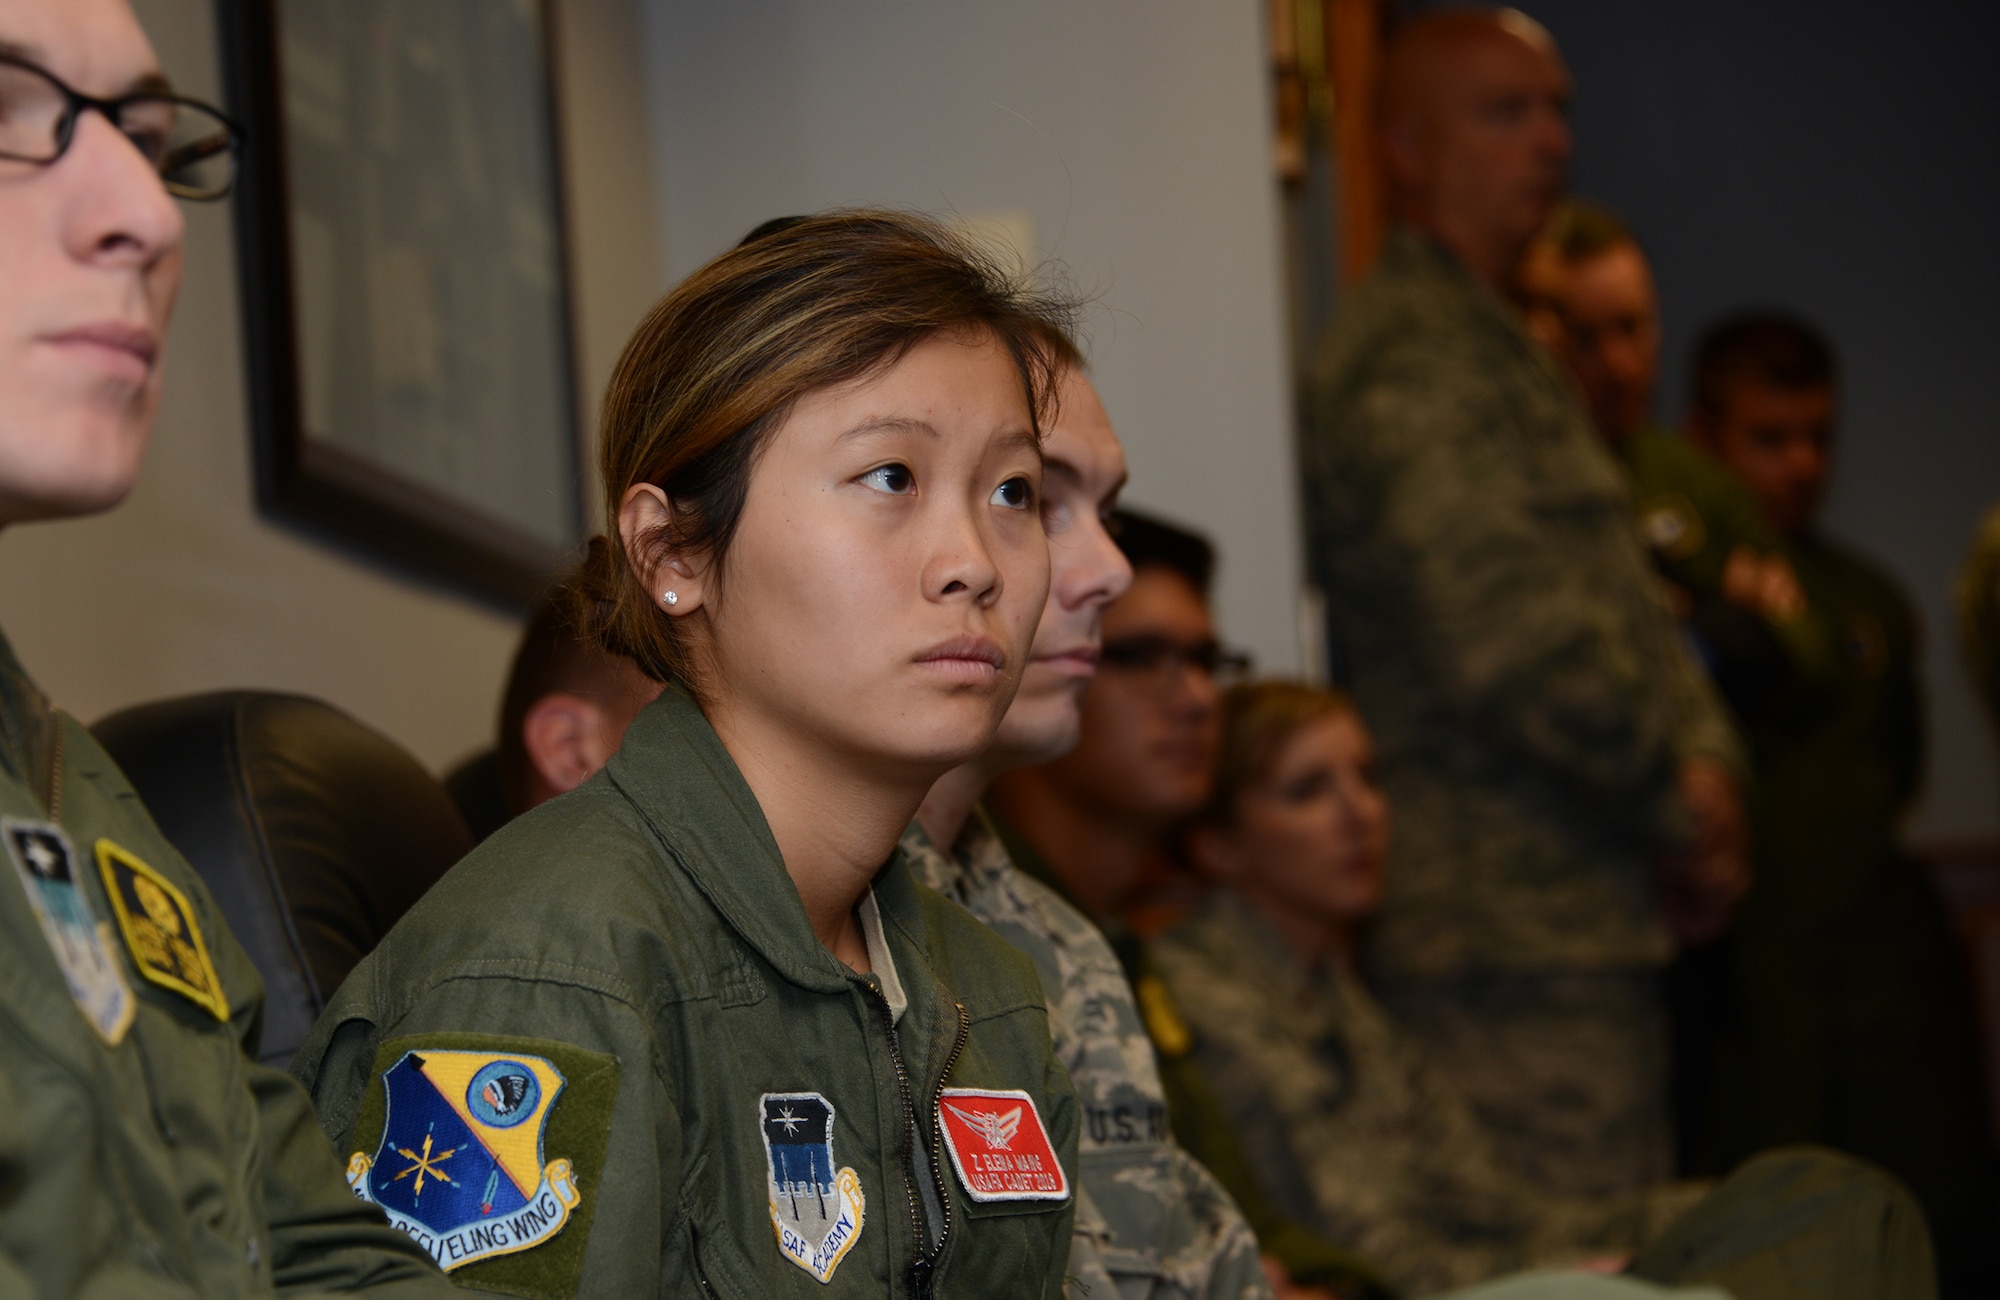 Cadet 2nd Class, Elena Wang from the United States Air Force Academy, listens to a briefing from Air National Guard Director Lt. Gen. Scott Rice during a visit to the 185th Air Refueling Wing, Iowa National Guard in Sioux City, Iowa on November 5, 2016. 
 U.S. Air National Guard photo by Master Sgt. Vincent De Groot 185 ARW PA